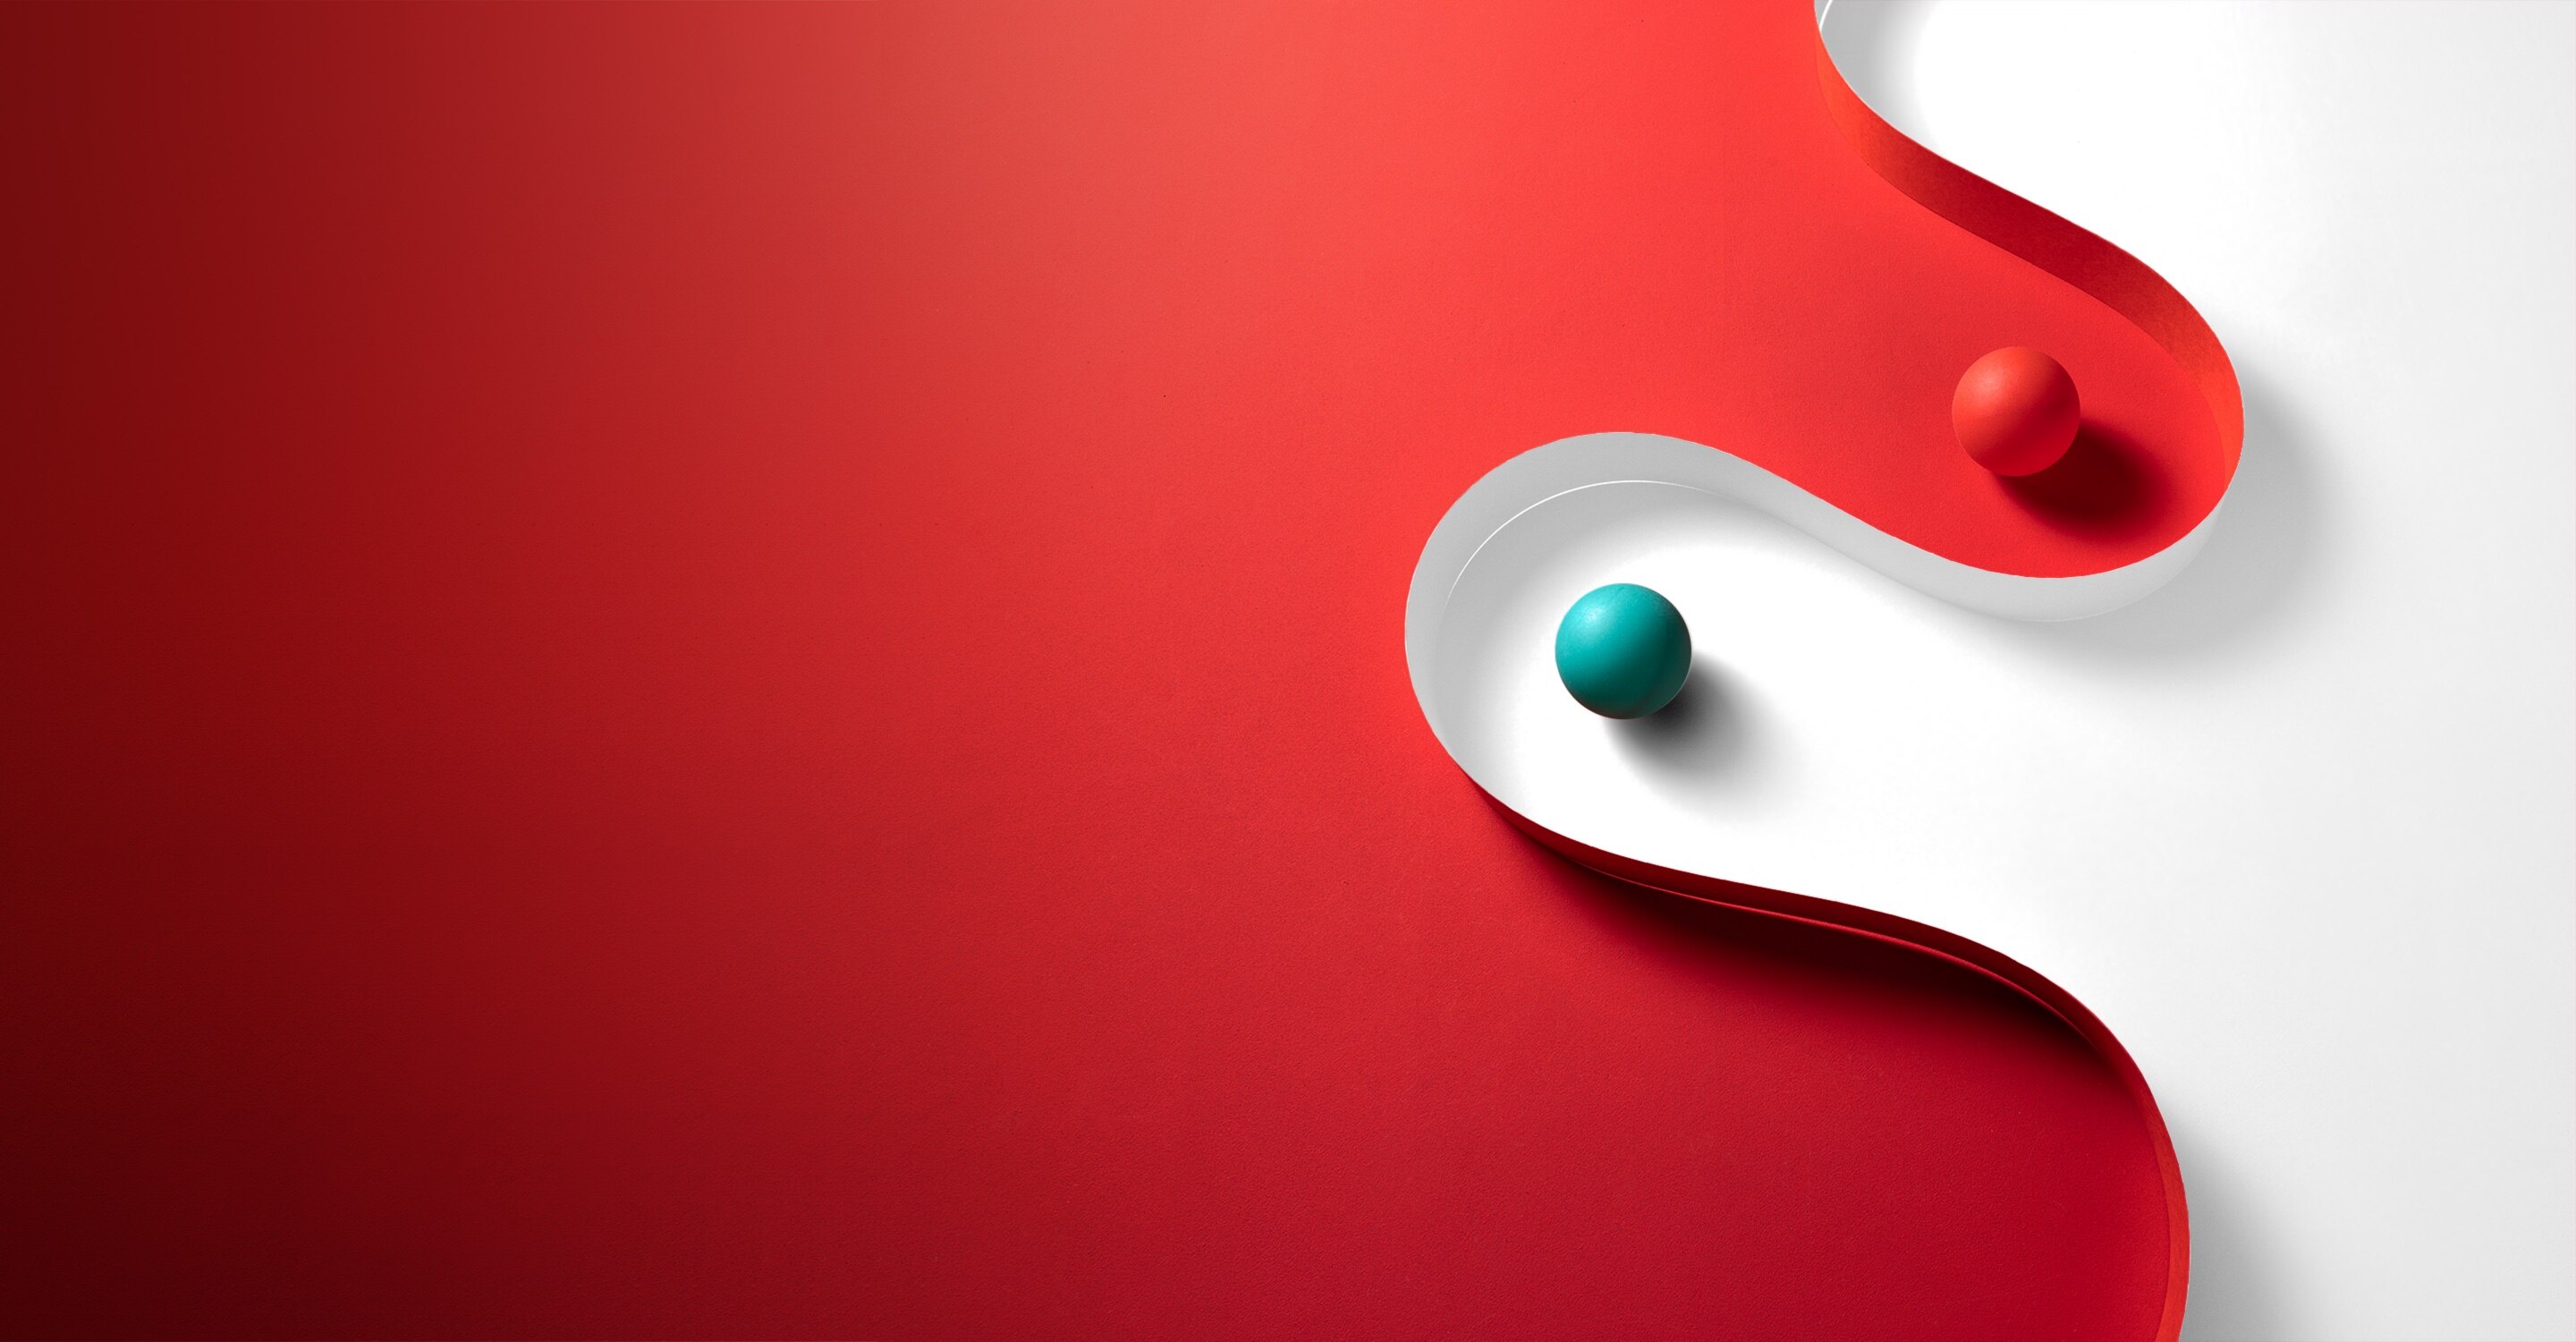 abstract image of turquoise and red balls on red and white background